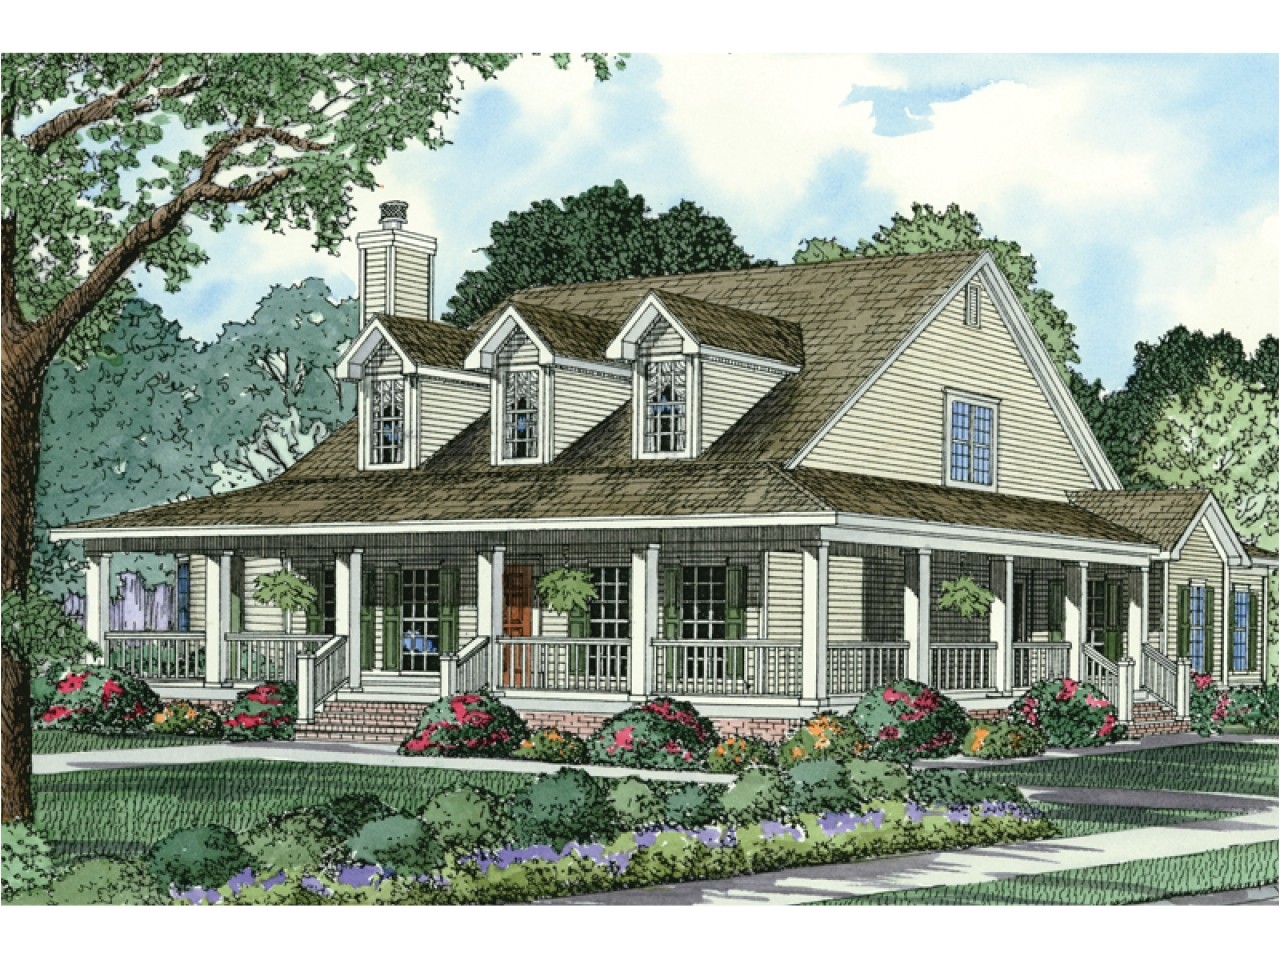 9c5e438da3efe095 french country house plans country style house plans with wrap around porches